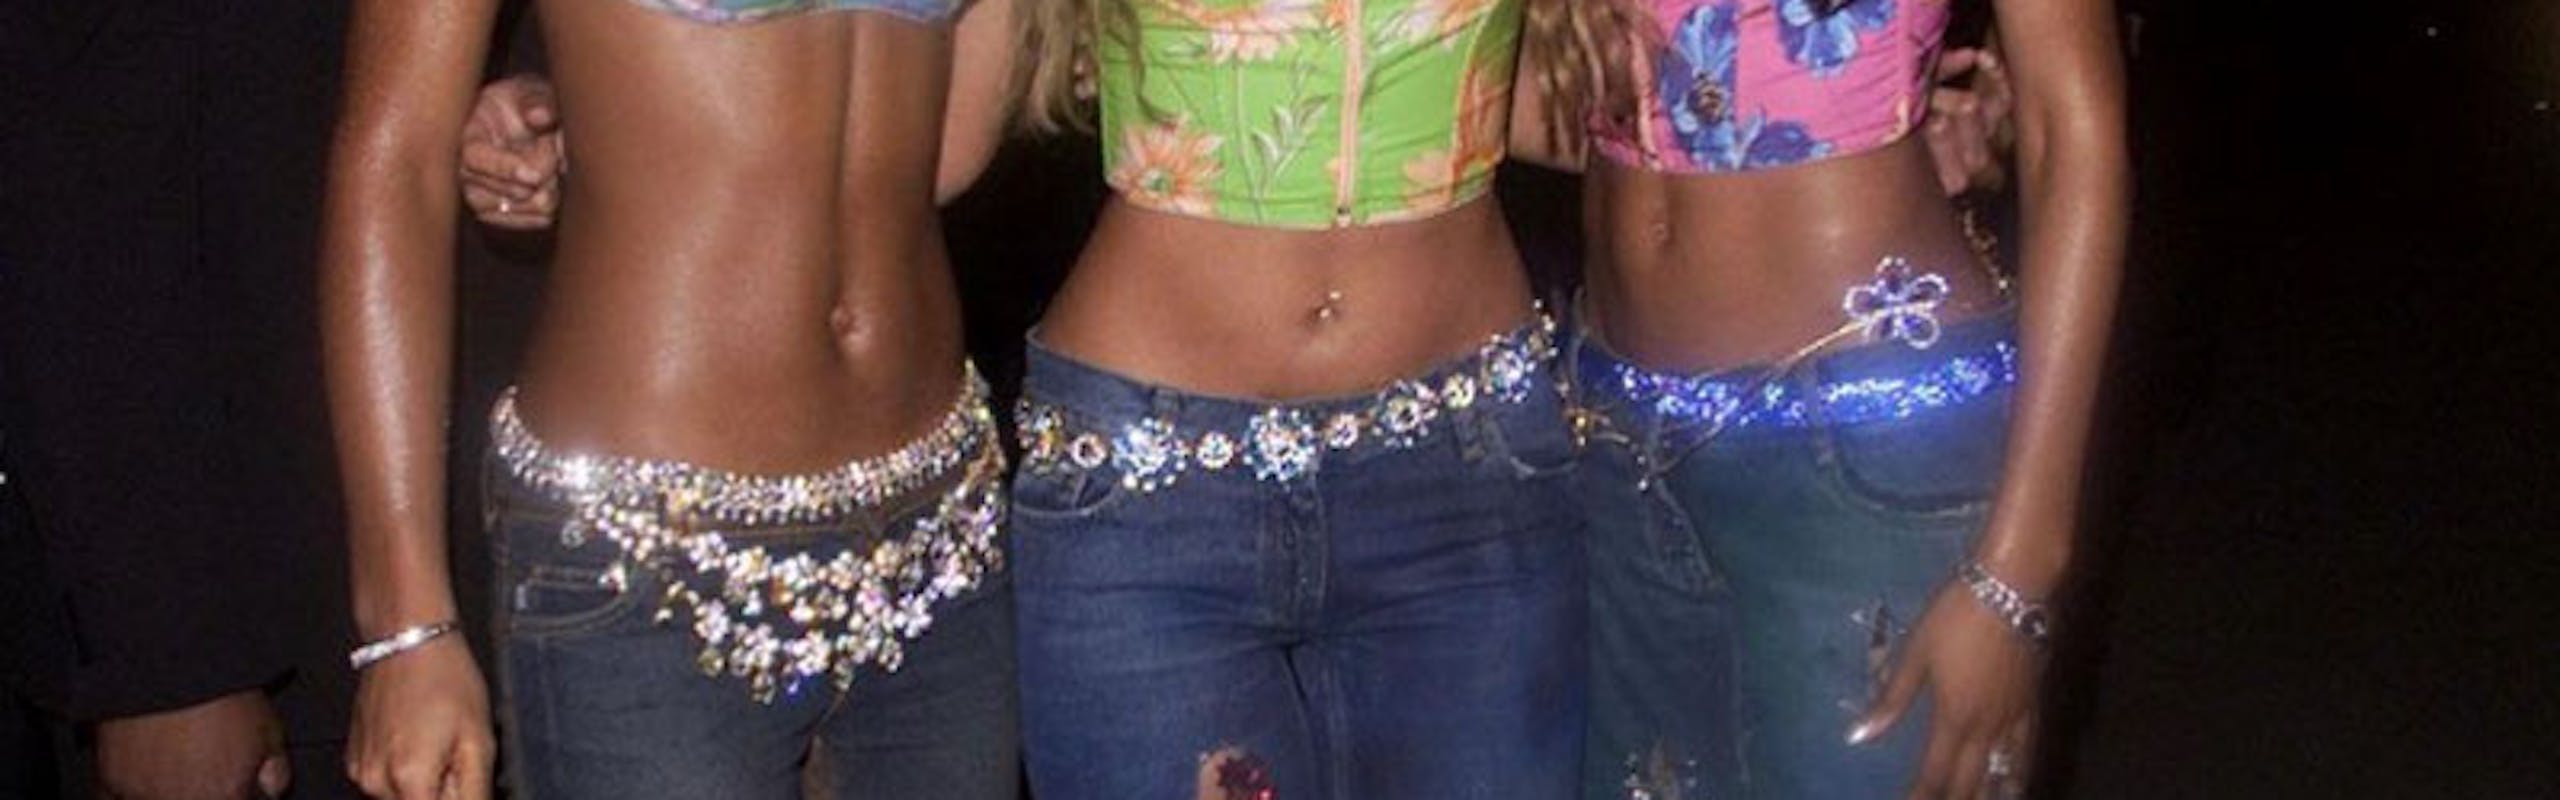 destiny's child girls in crop tops and embellished and bedazzled jeans